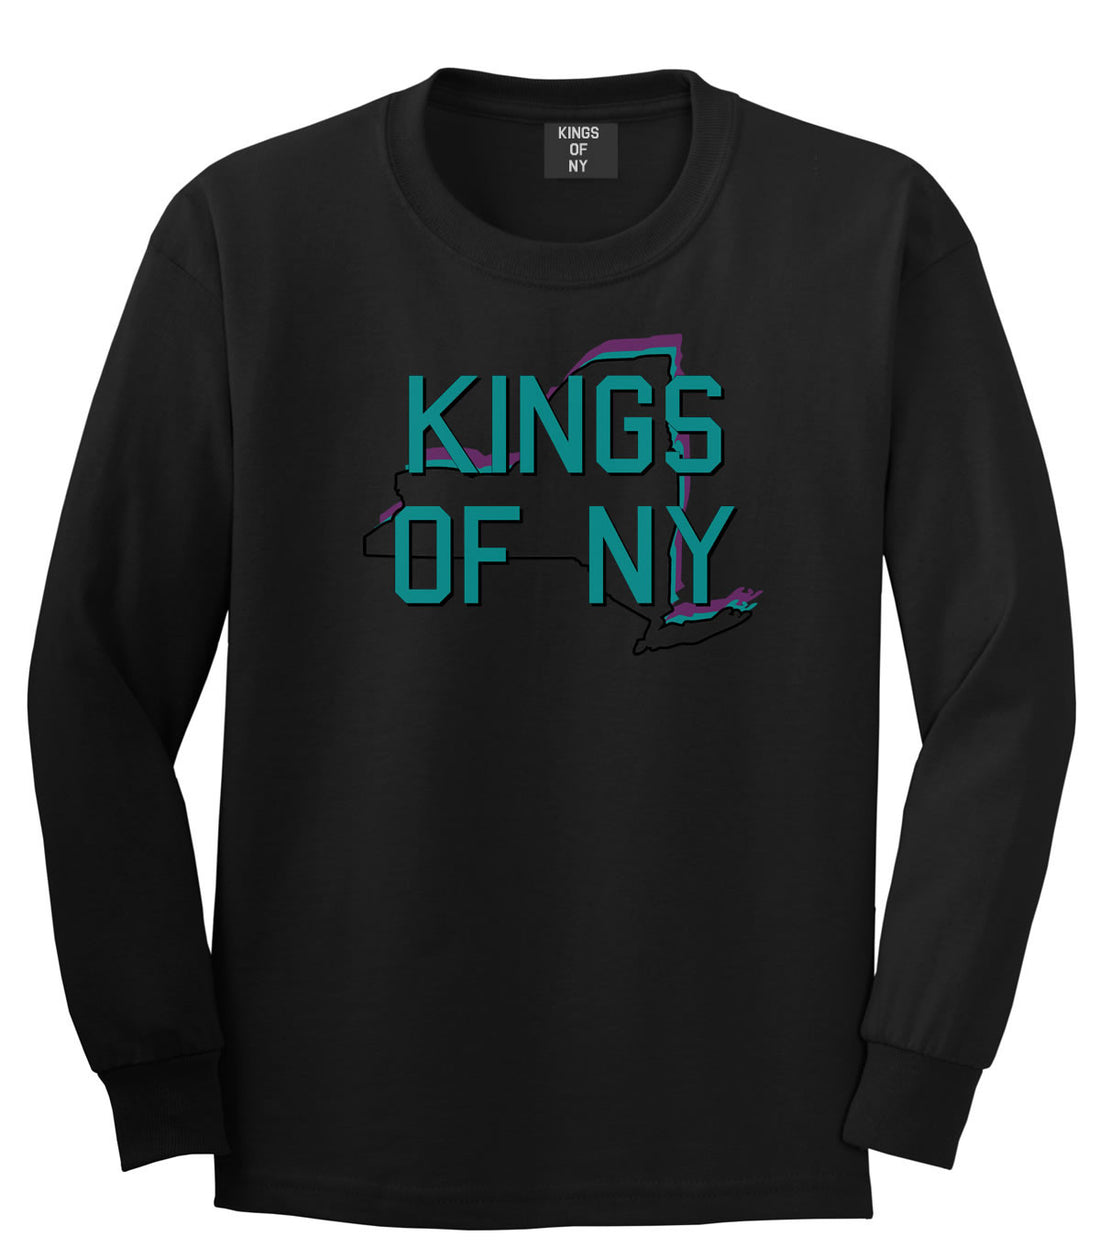 New York State Outline Long Sleeve T-Shirt in Black by Kings Of NY